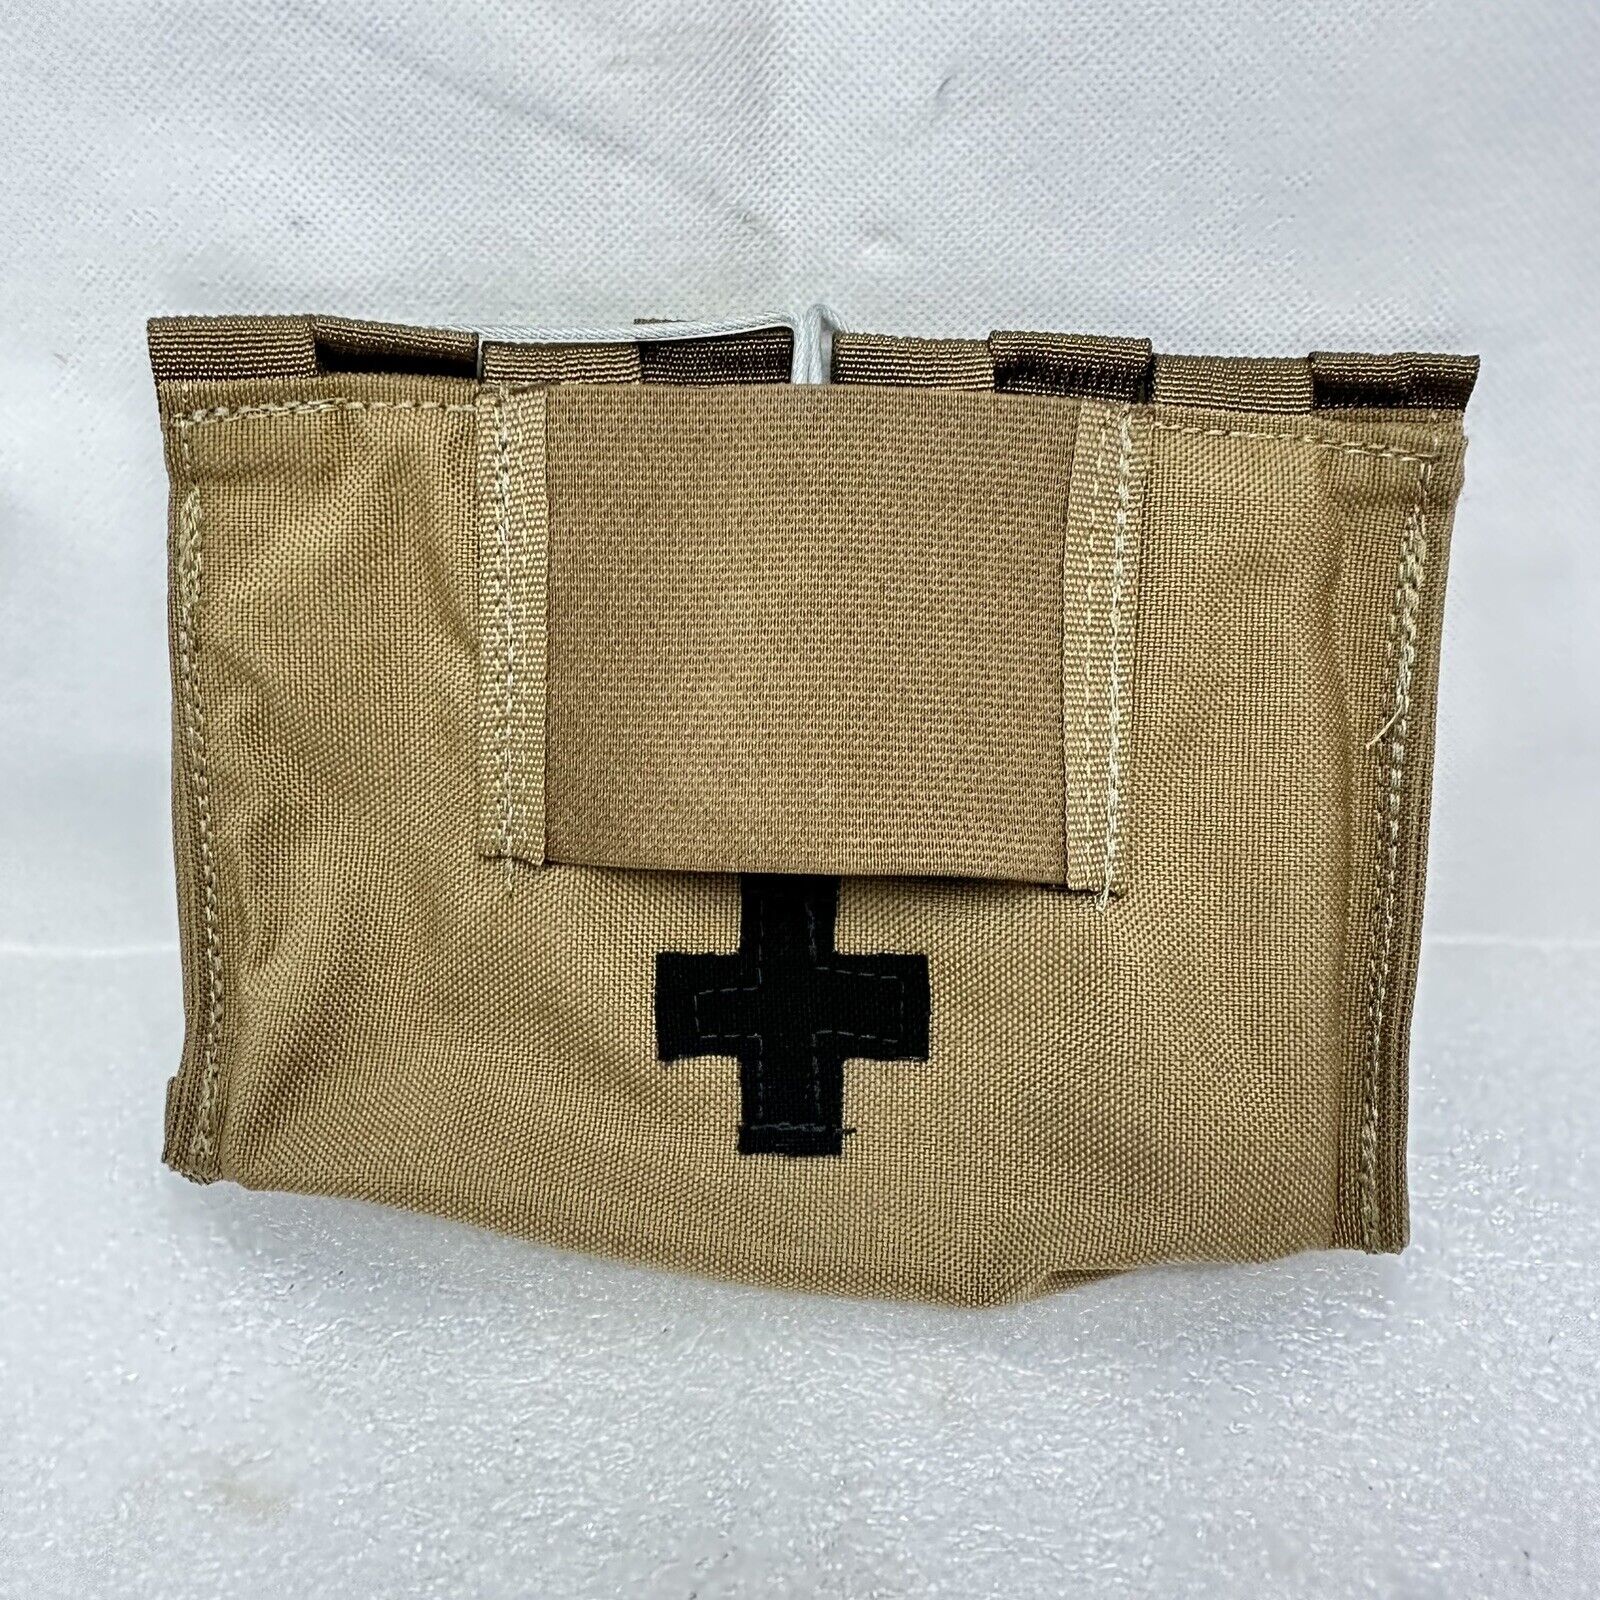 London Bridge Trading LBT-9022B-T Small Blow Out Medical Kit Pouch Coyote Brown